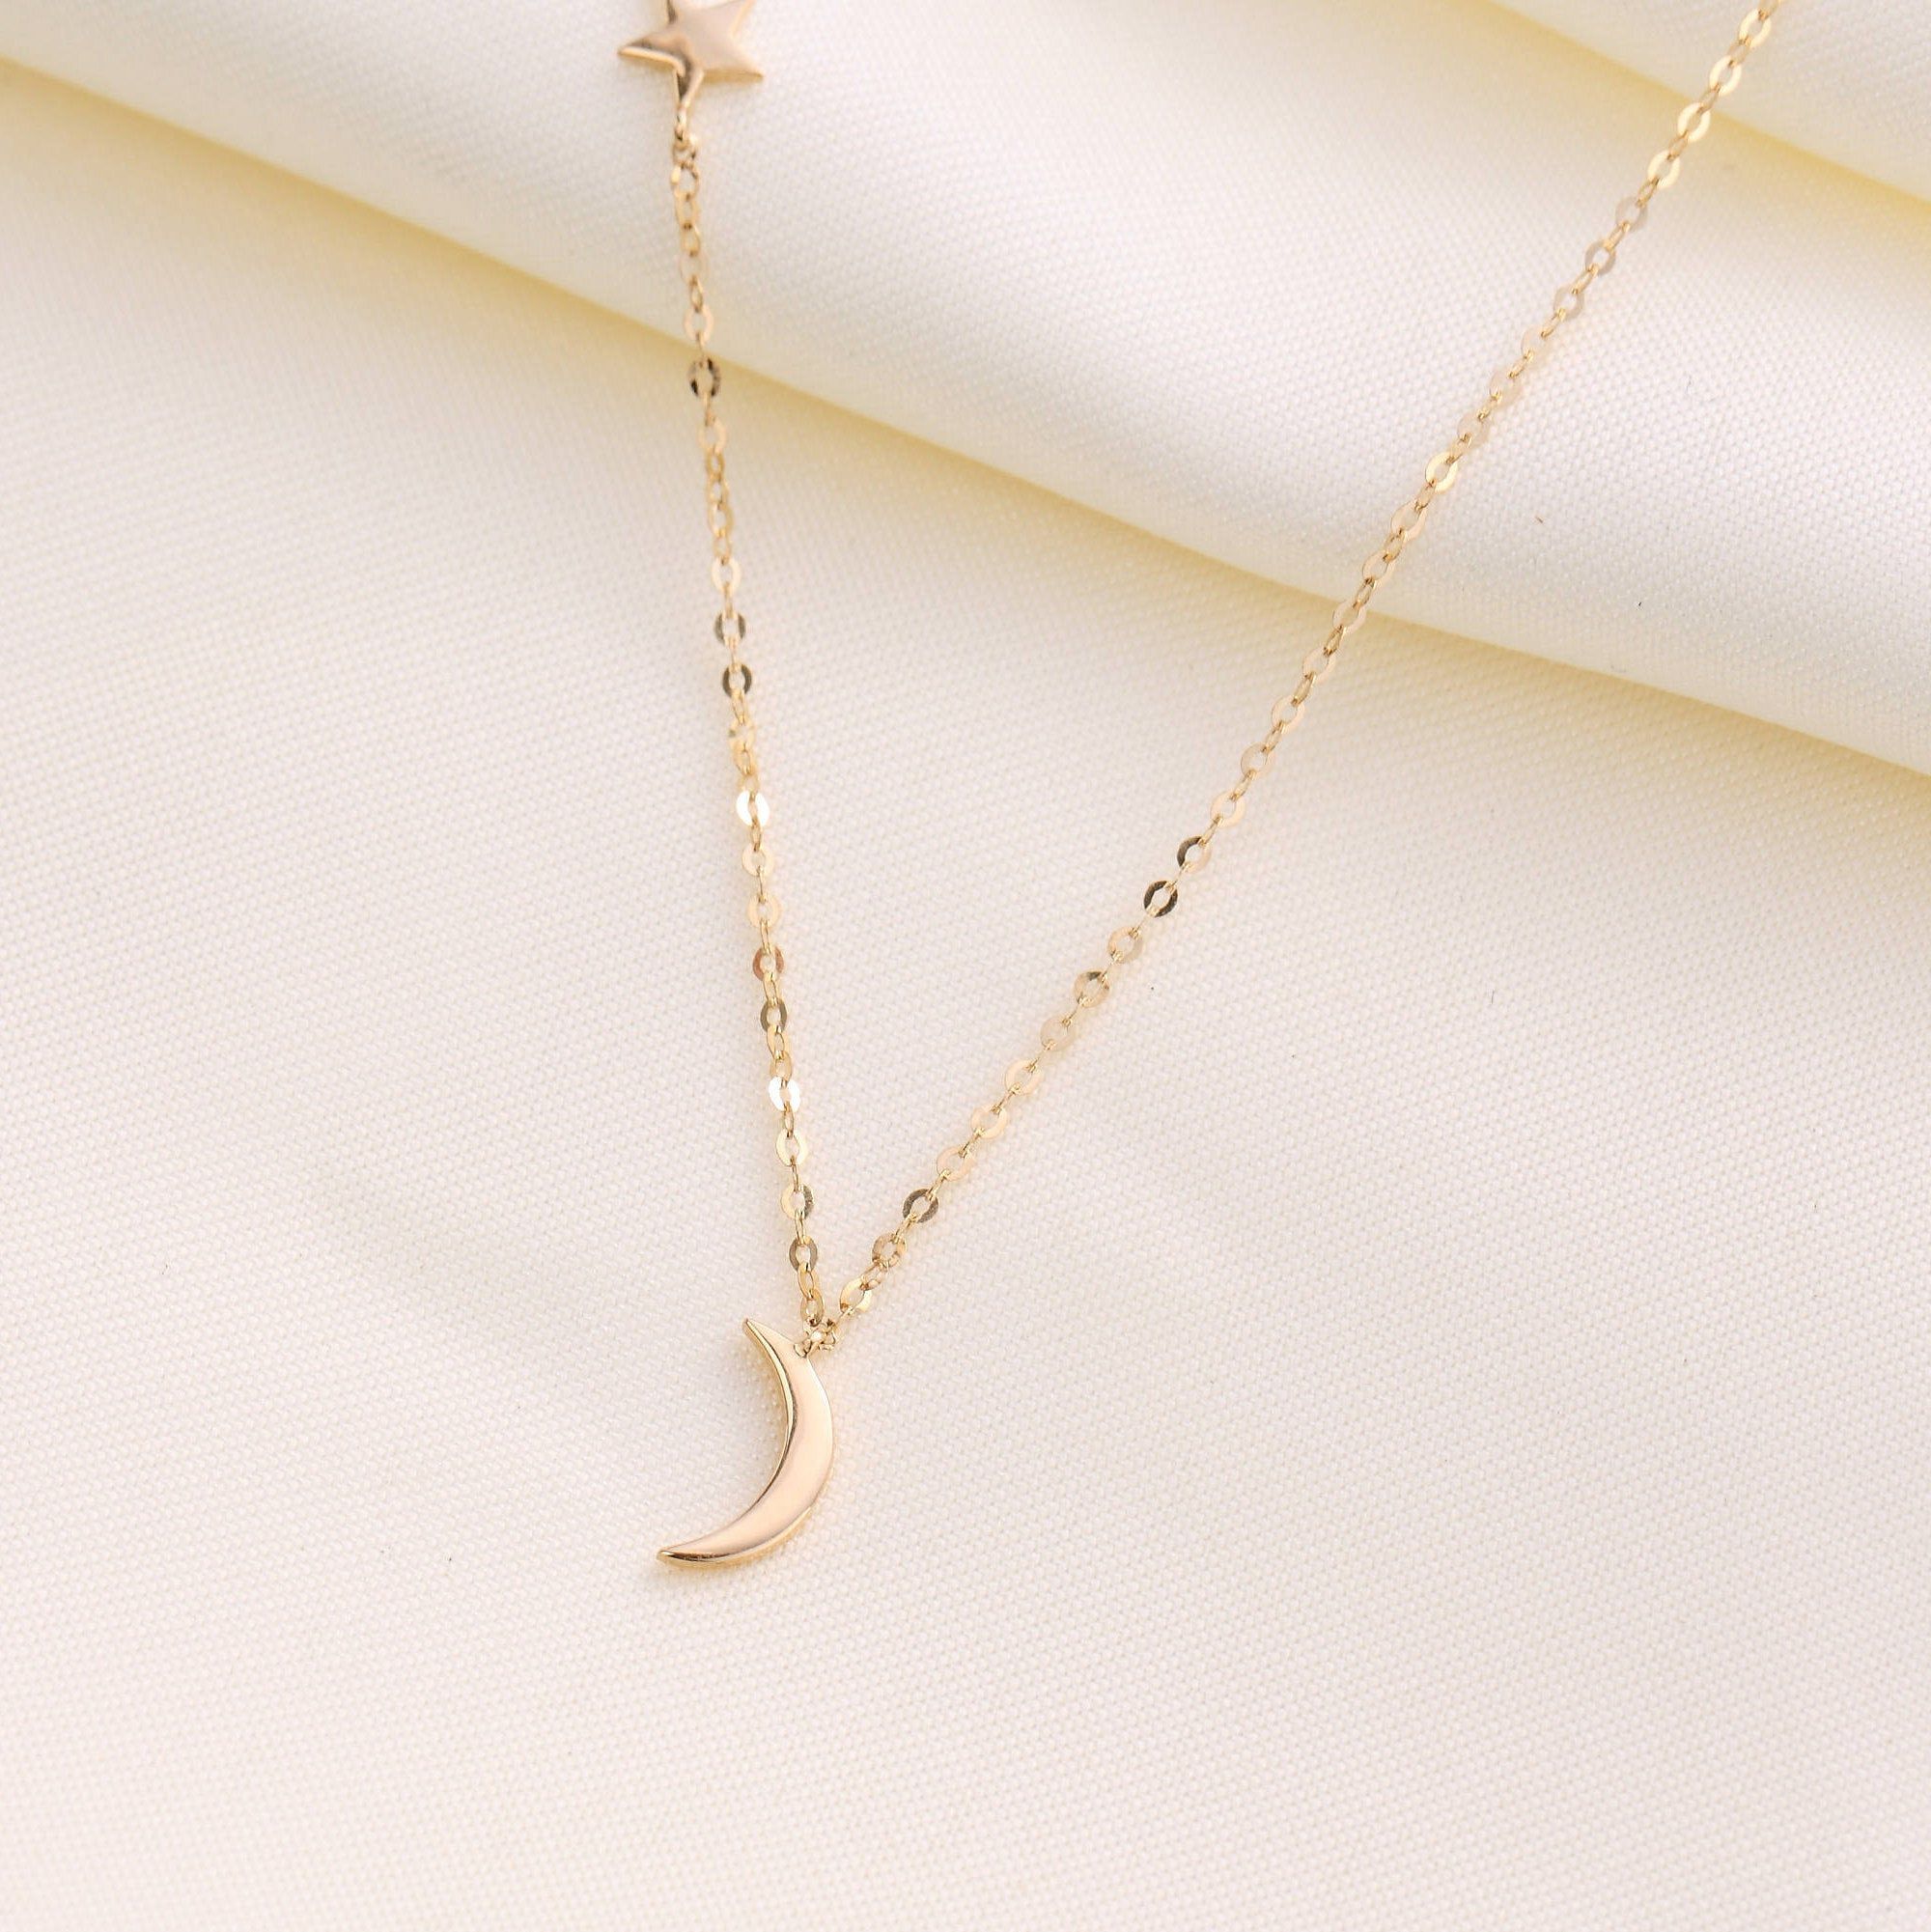 14k 18k Rose Gold Diamond Pendant Necklace, Crescent Moon And Star, Dainty  Gold Jewelry, Personalized Custom Gift Purplemay P011 For Most Recently Released Polished Moon & Star Pendant Necklaces (View 14 of 25)